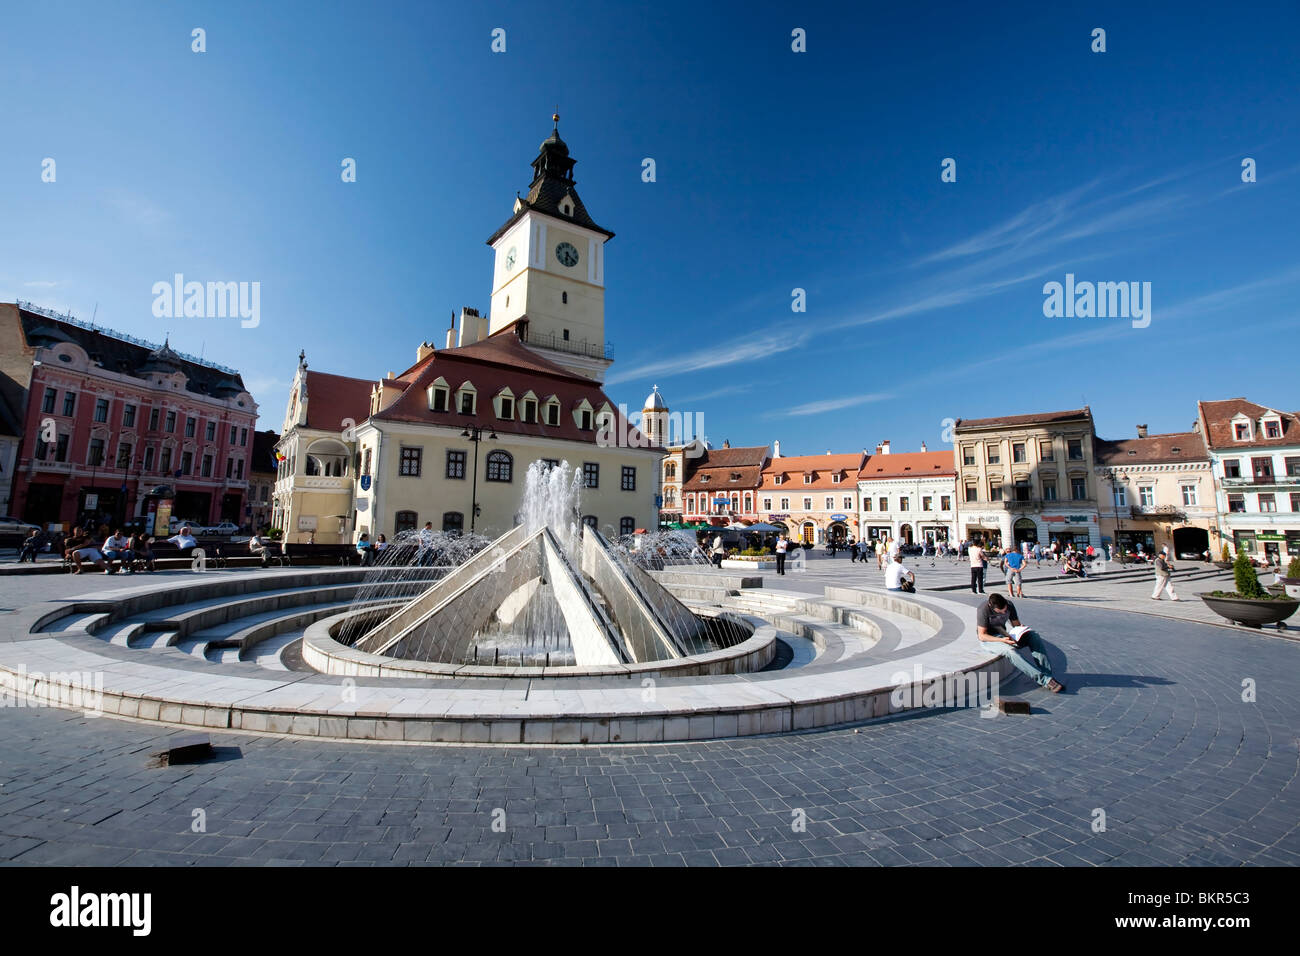 Romania, Transylvania, Brasov. The fountain in the main square of the old town, with the Old City Hall behind. Stock Photo